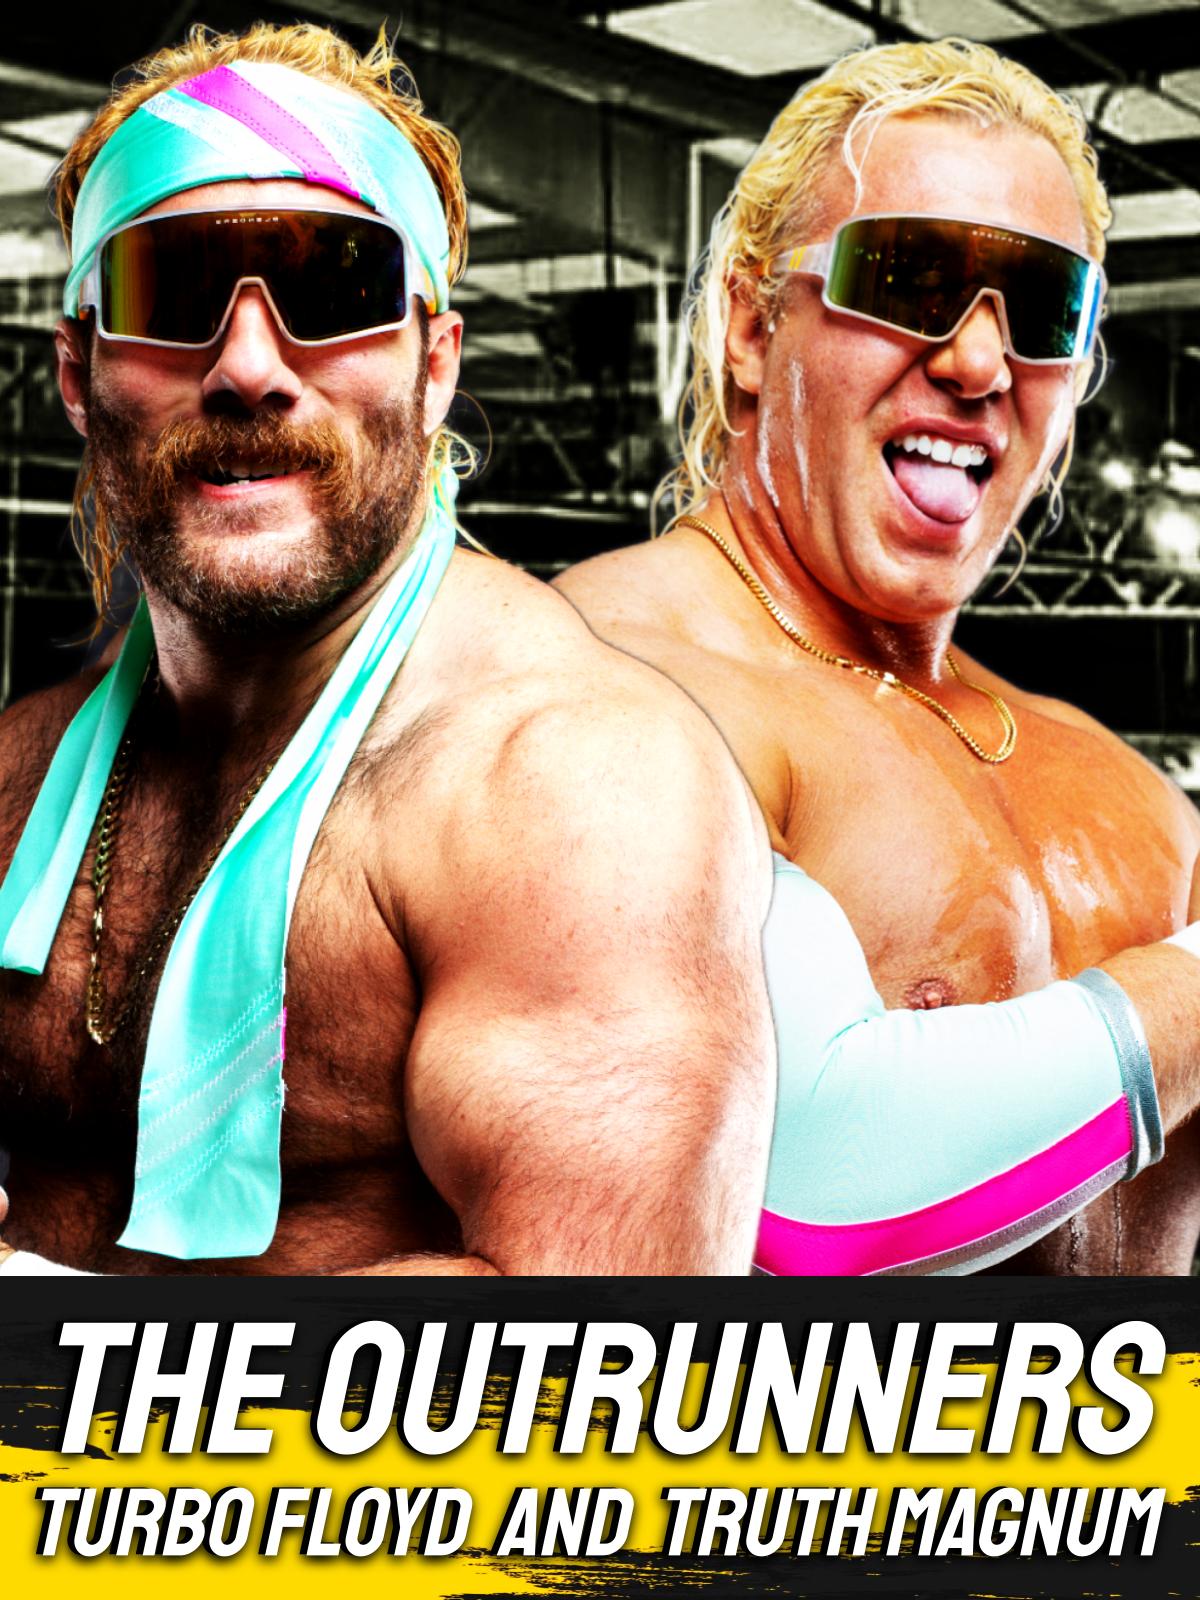 The Outrunners OVW Wrestling